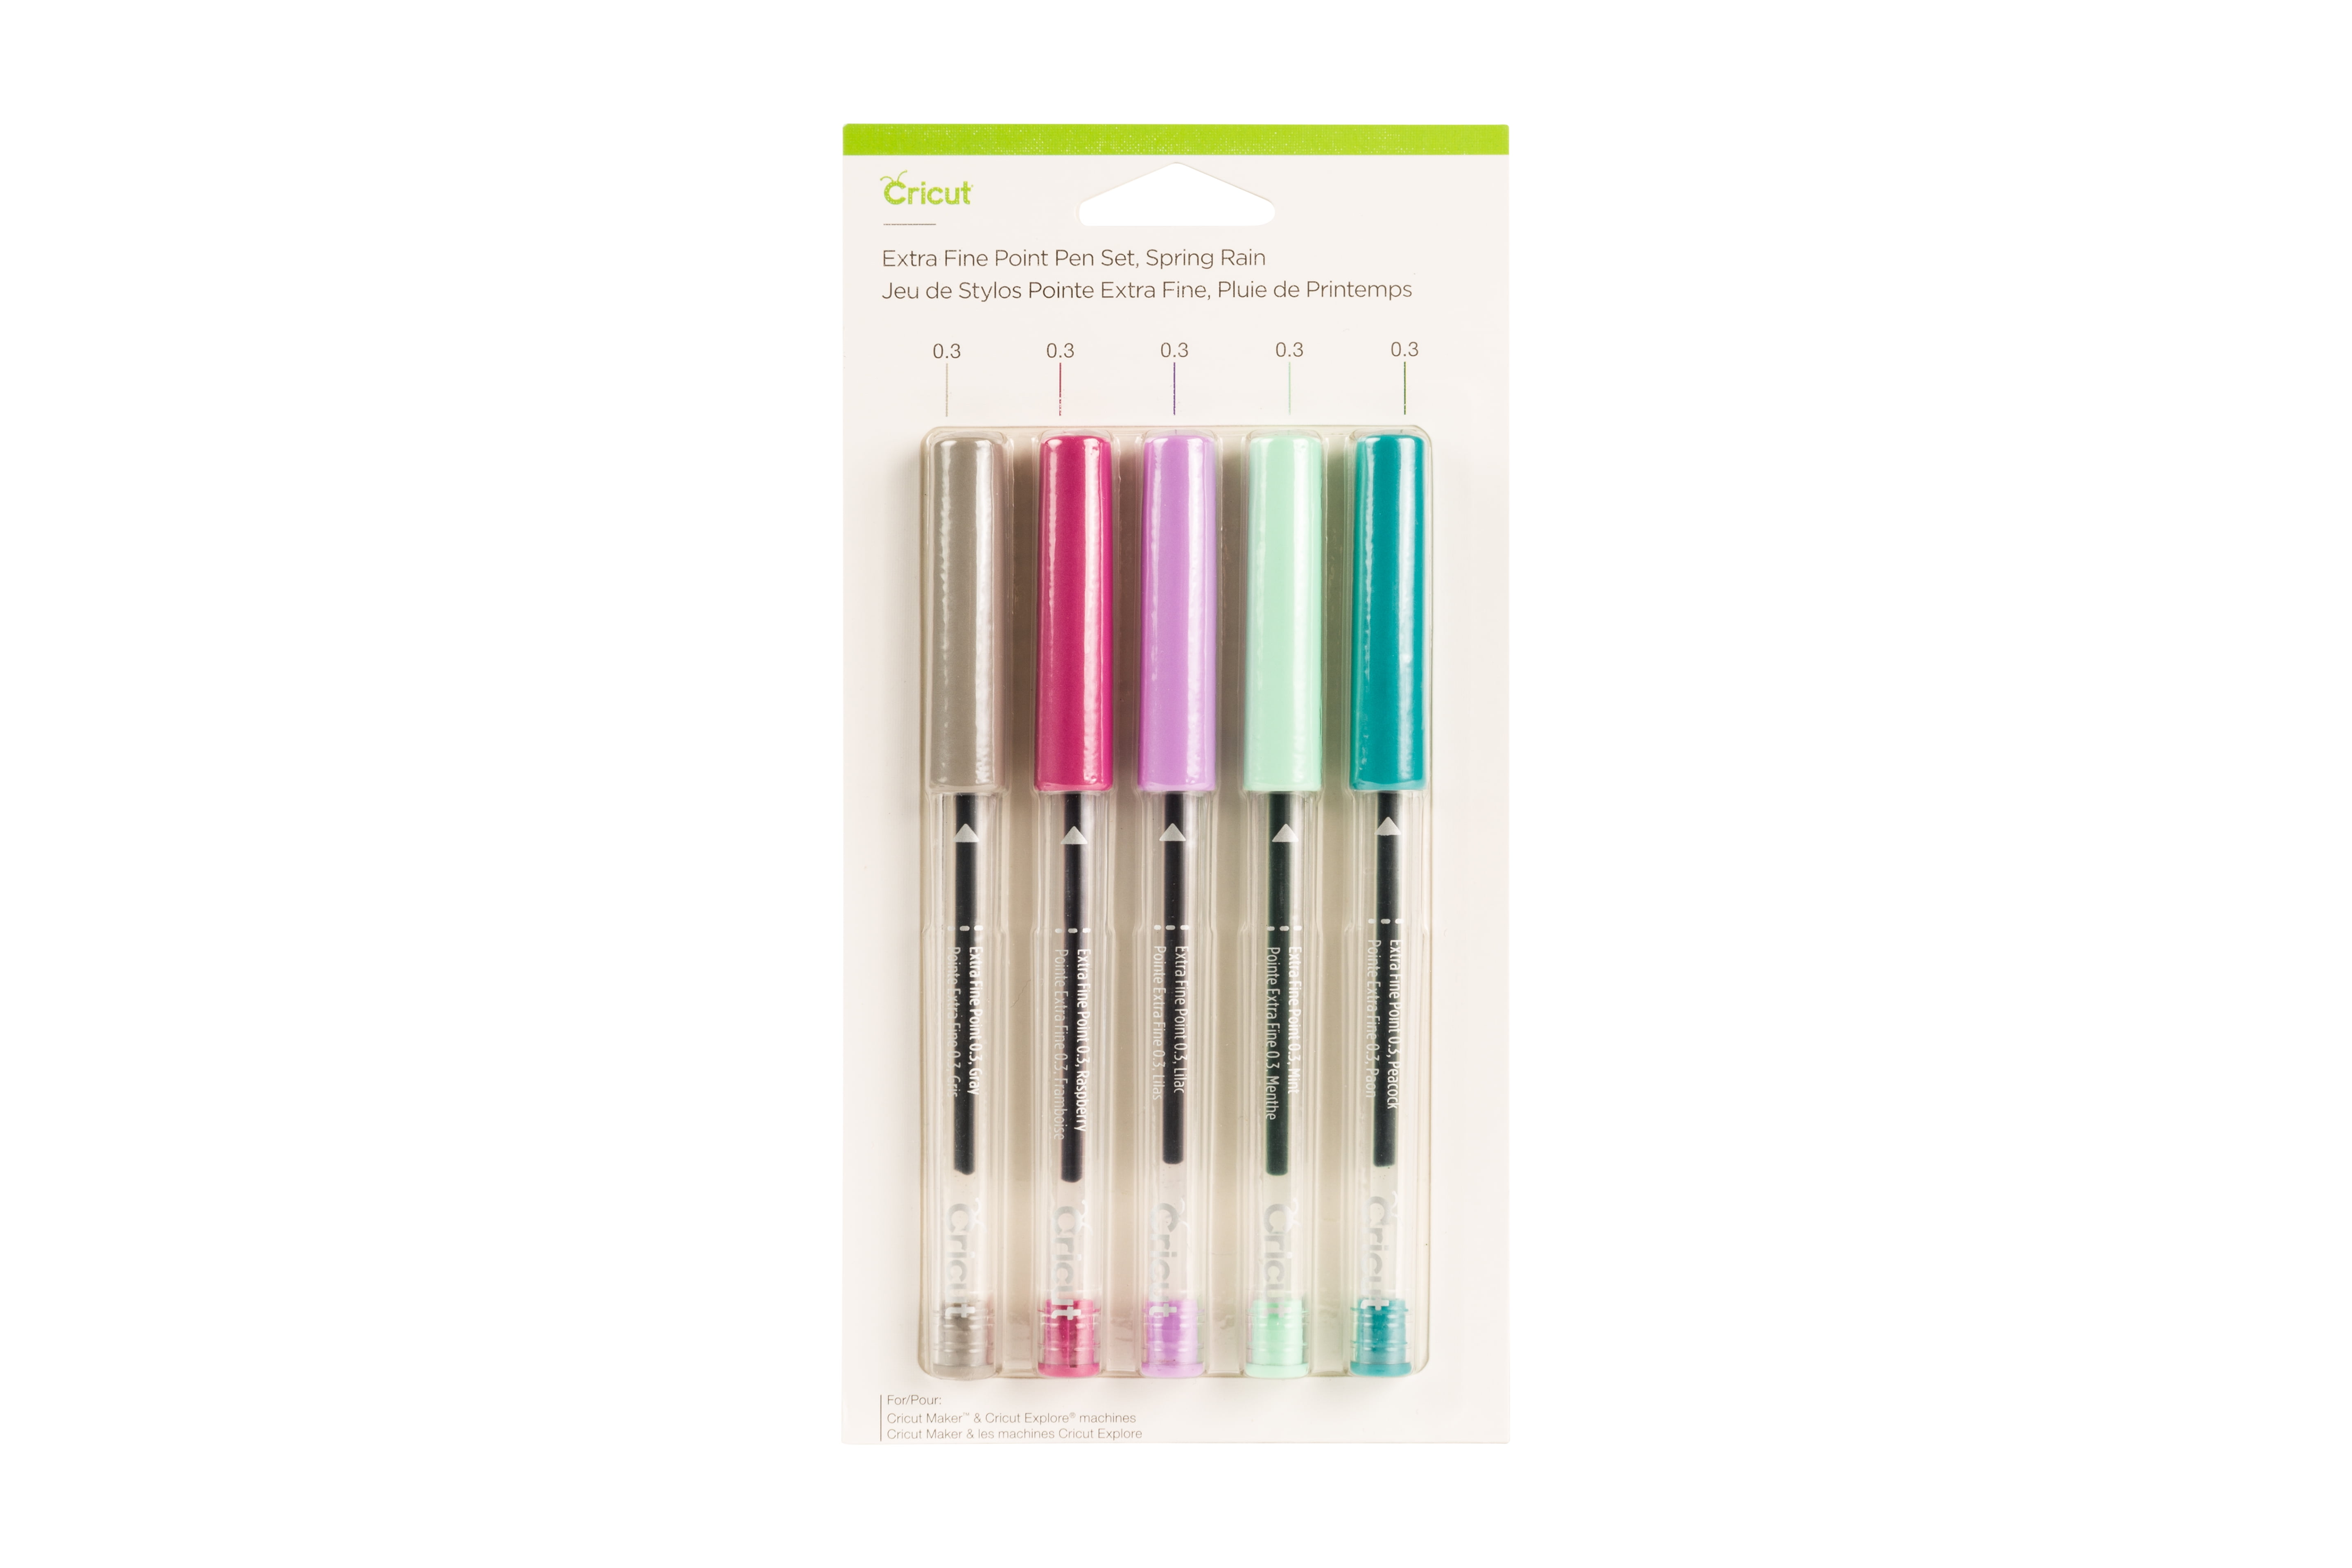 Cricut Ultimate Fine Point Pen Set, 0.4mm Fine Tip Pens to Write, Draw &  Color, Create Personalized Cards & Invites, Use with Cricut Maker and  Explore